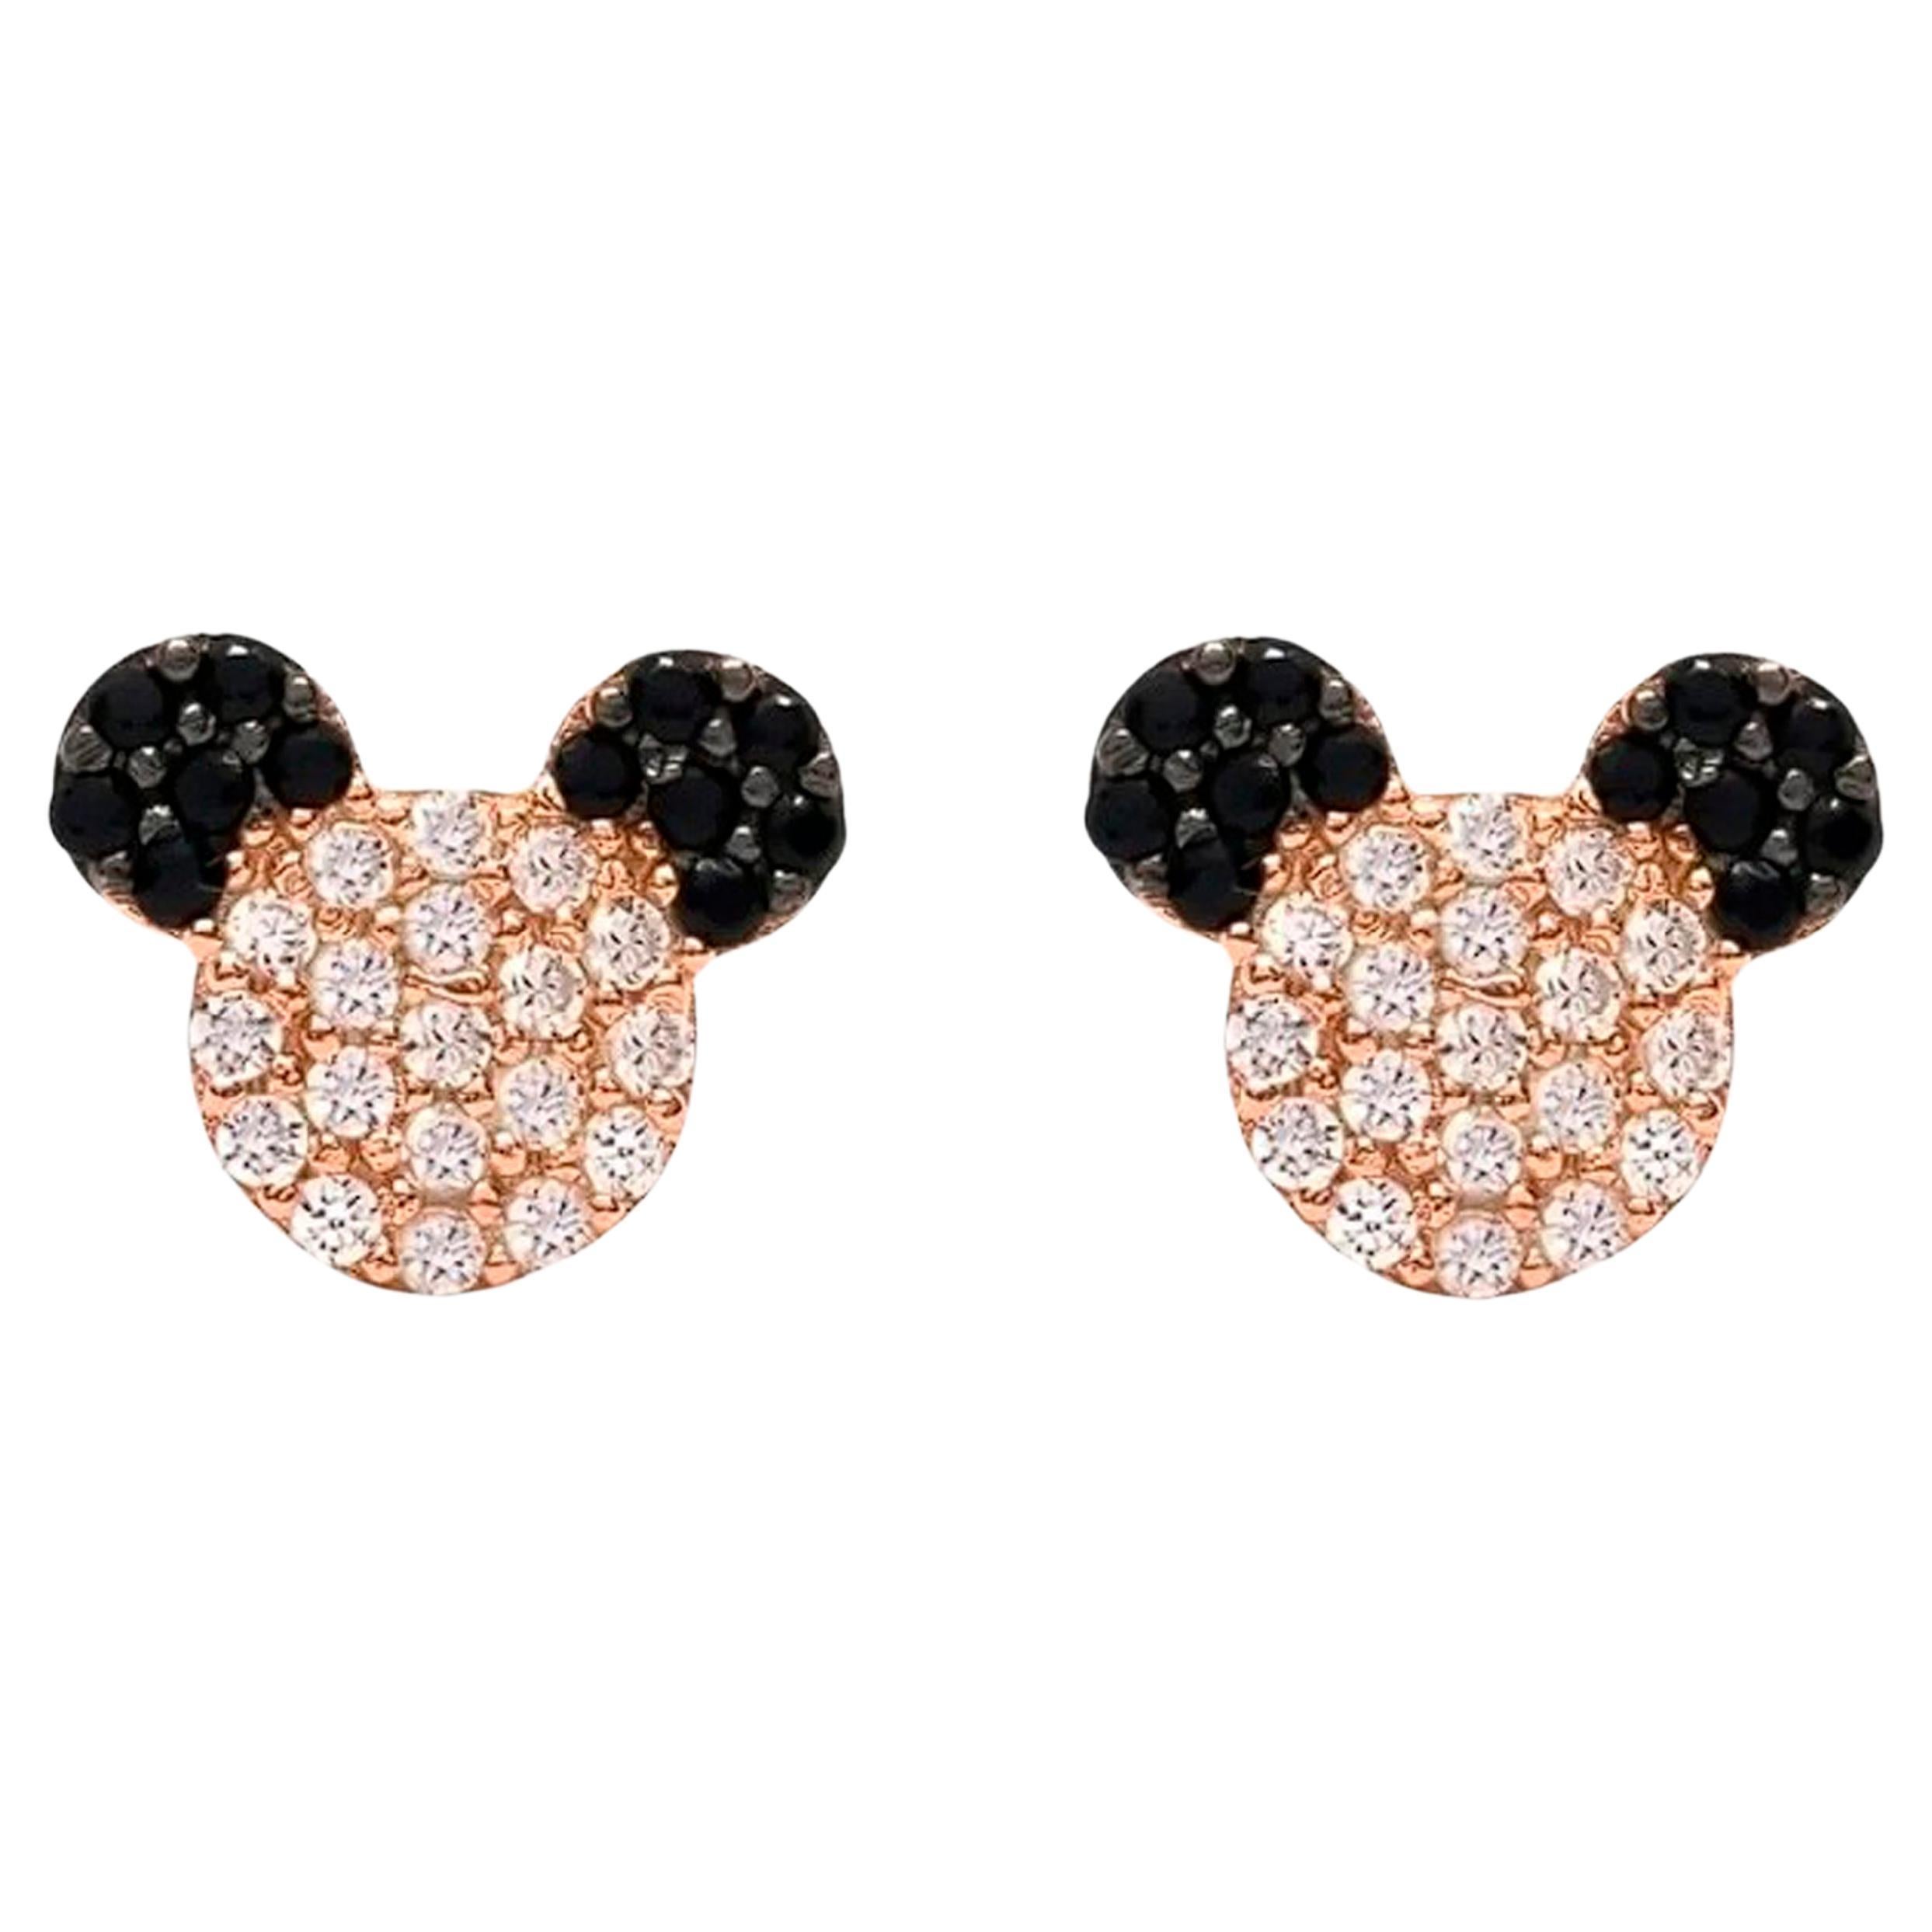 Minnie Mouse 14k gold Earrings Studs with gemstones.  For Sale